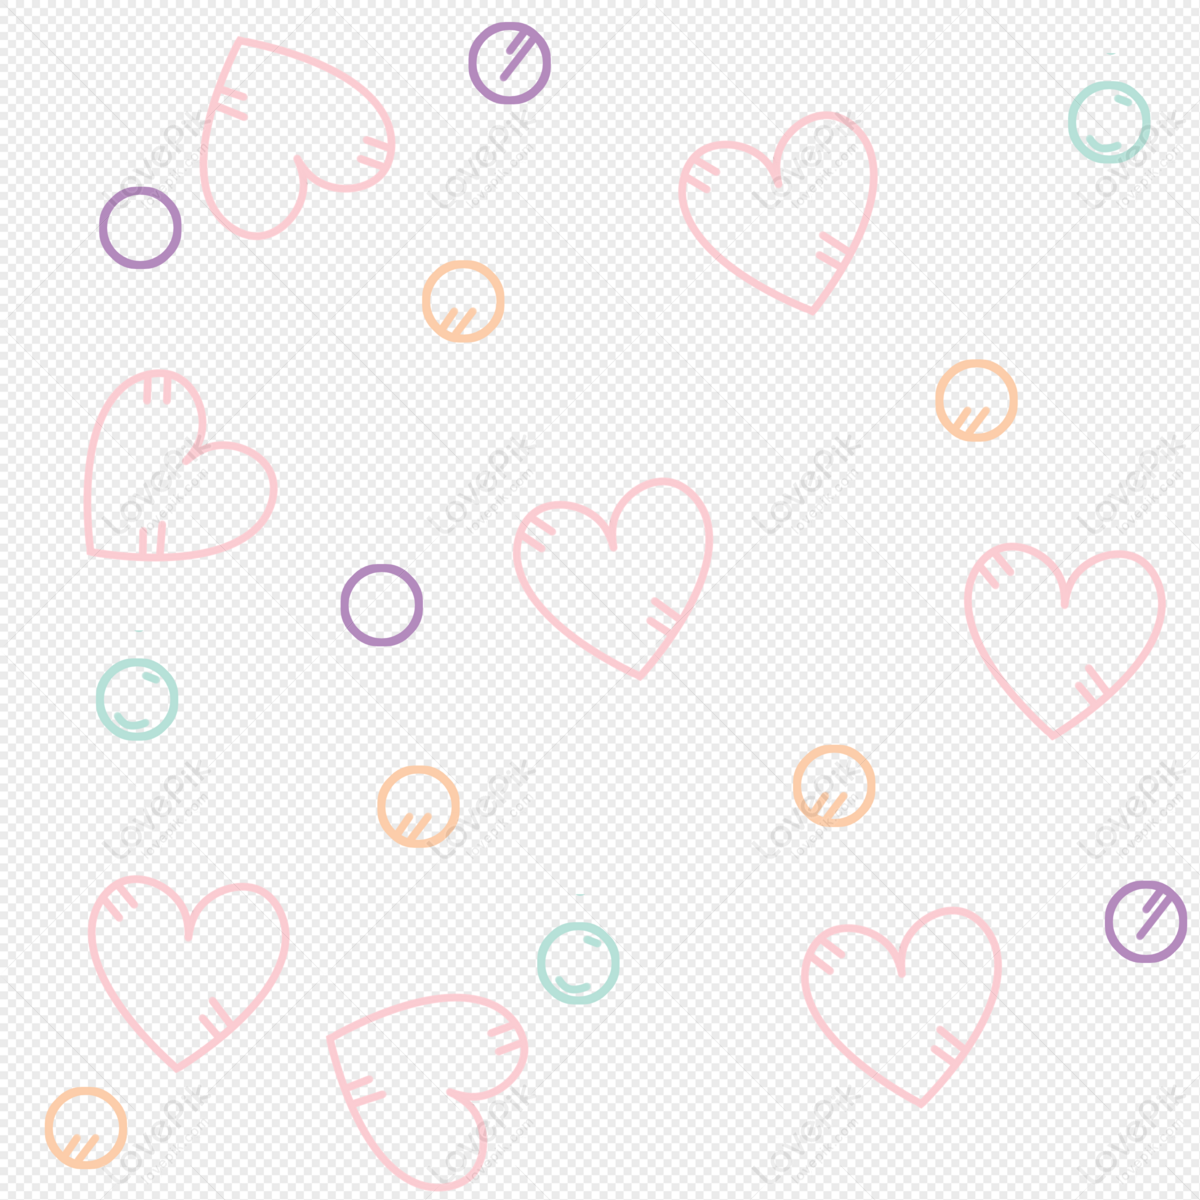 520 Valentines Day Love Shading PNG Image And Clipart Image For Free ...